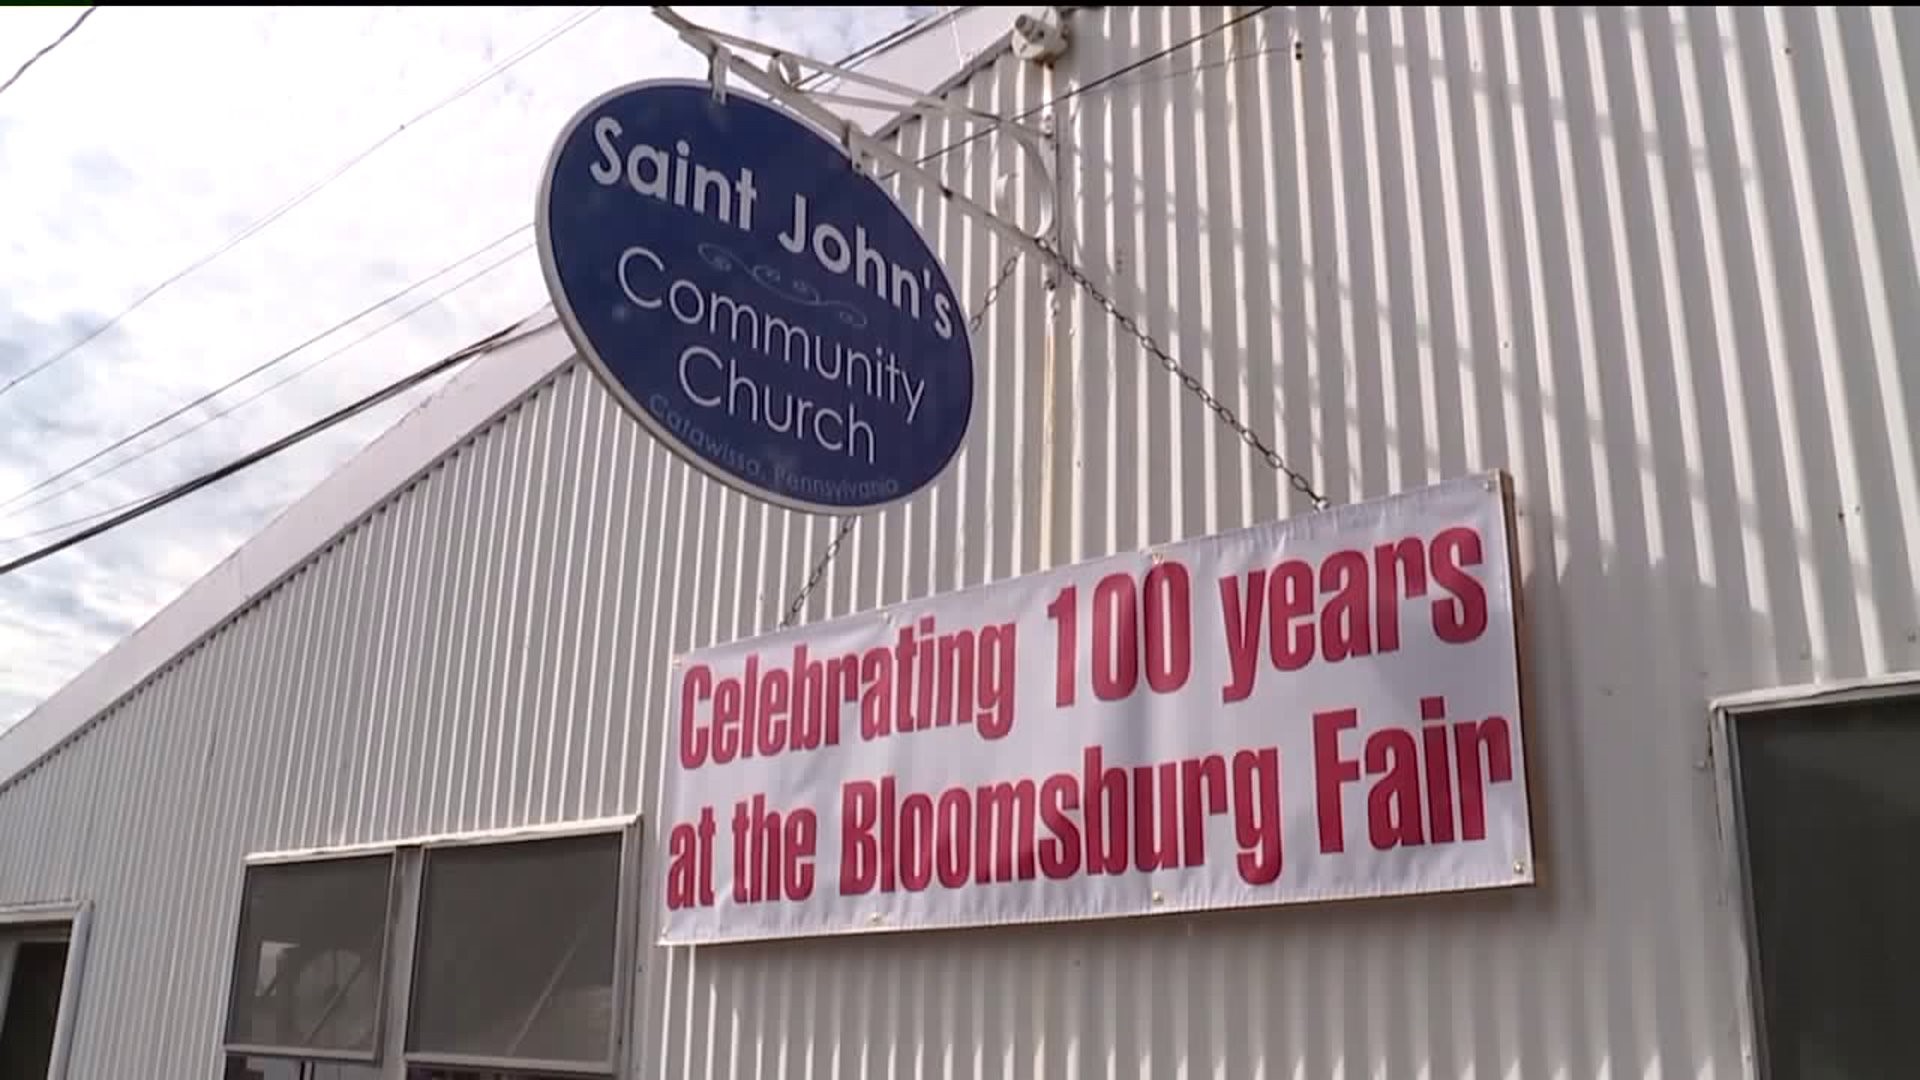 Church Stand Celebrating 100 Years at the Bloomsburg Fair